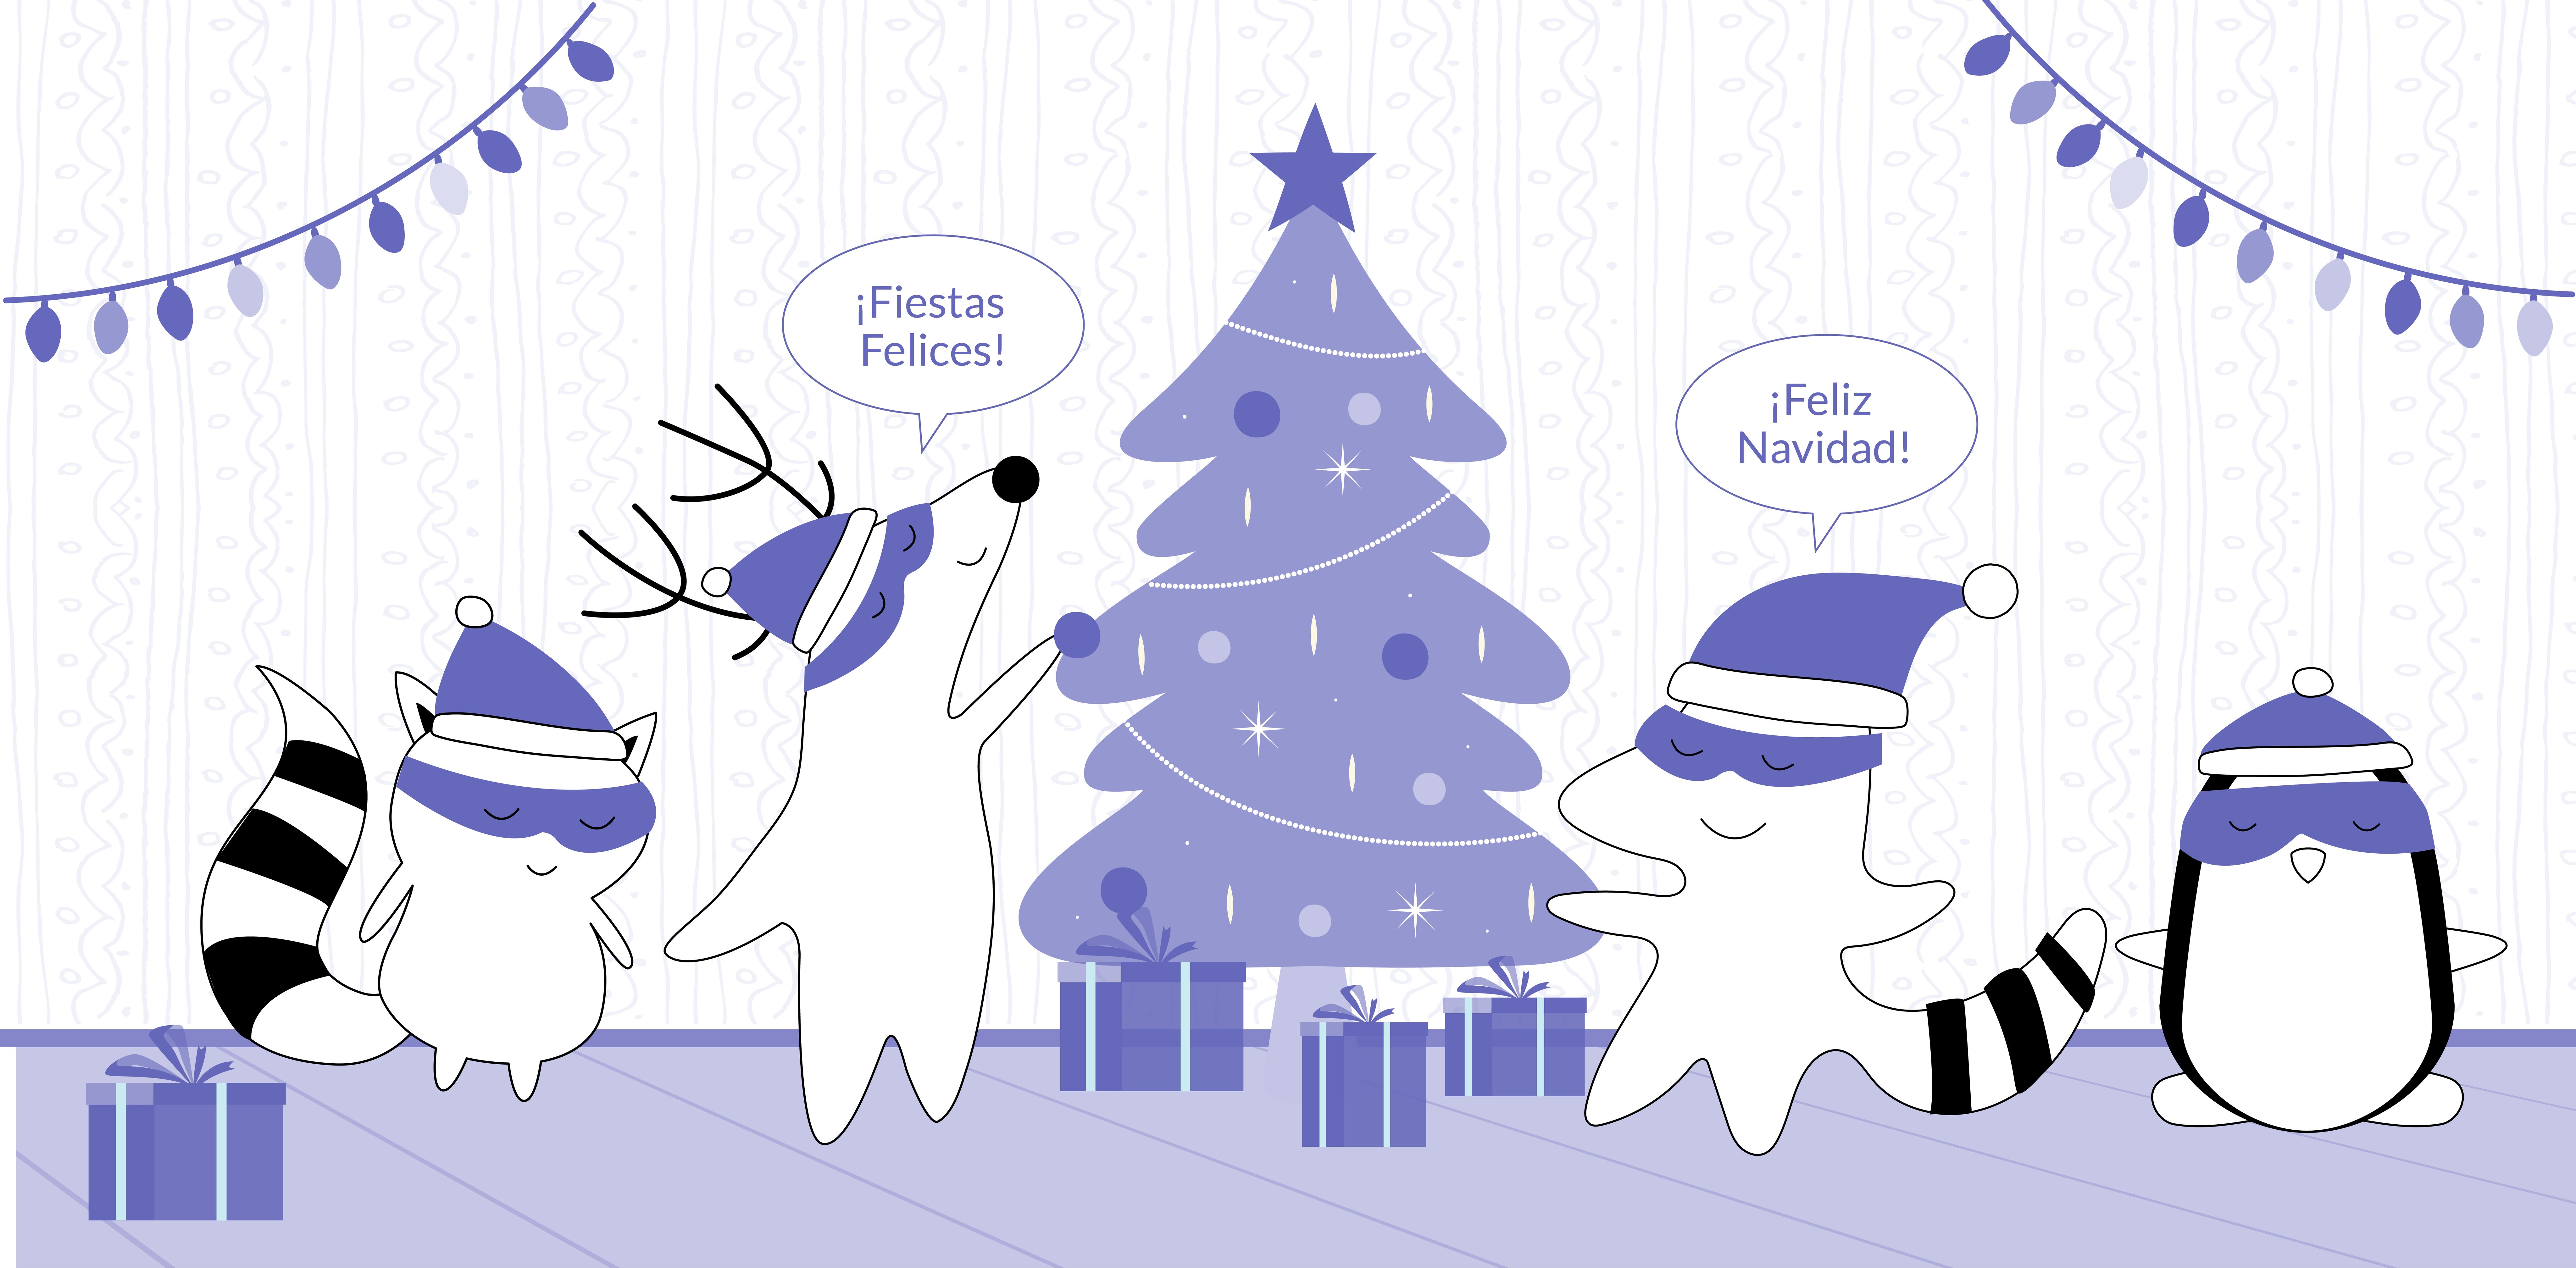 Iggy and Soren are decorating a Christmas tree when Pocky and Benji arrive. They greet them with ¡Feliz Navidad! and ¡Fiestas Felices! 